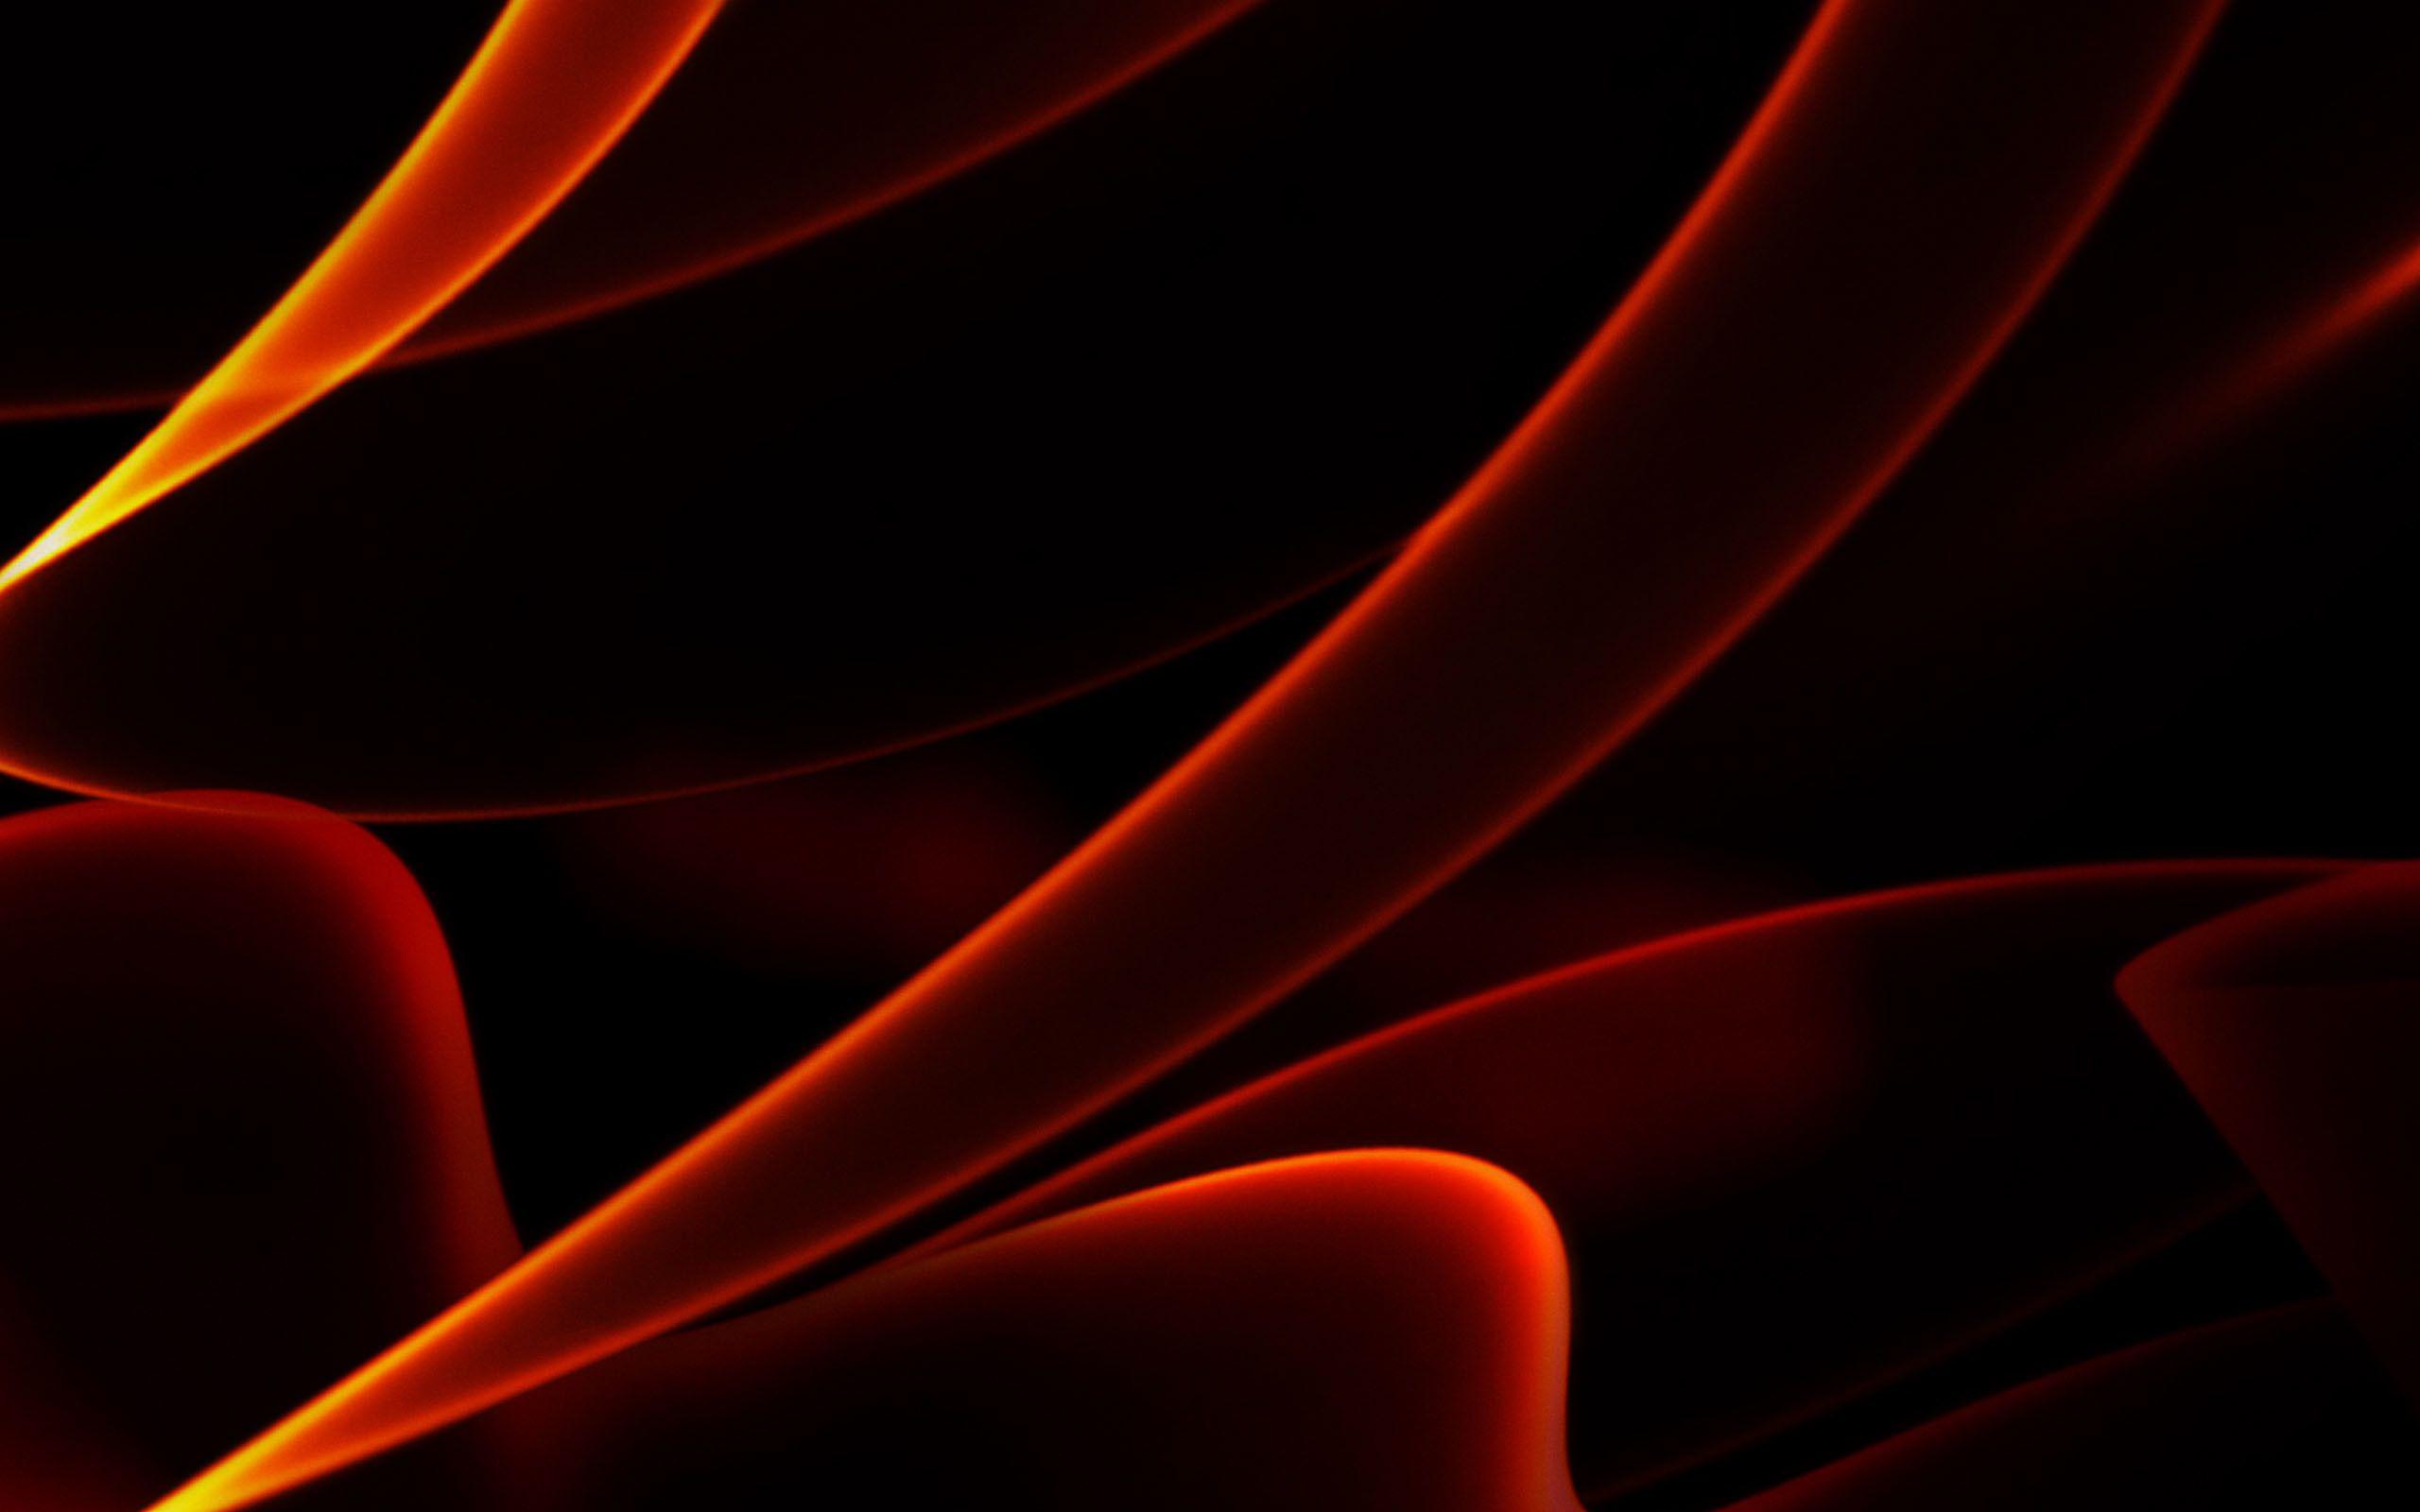 Red Gold Background Images  Free Download on Freepik